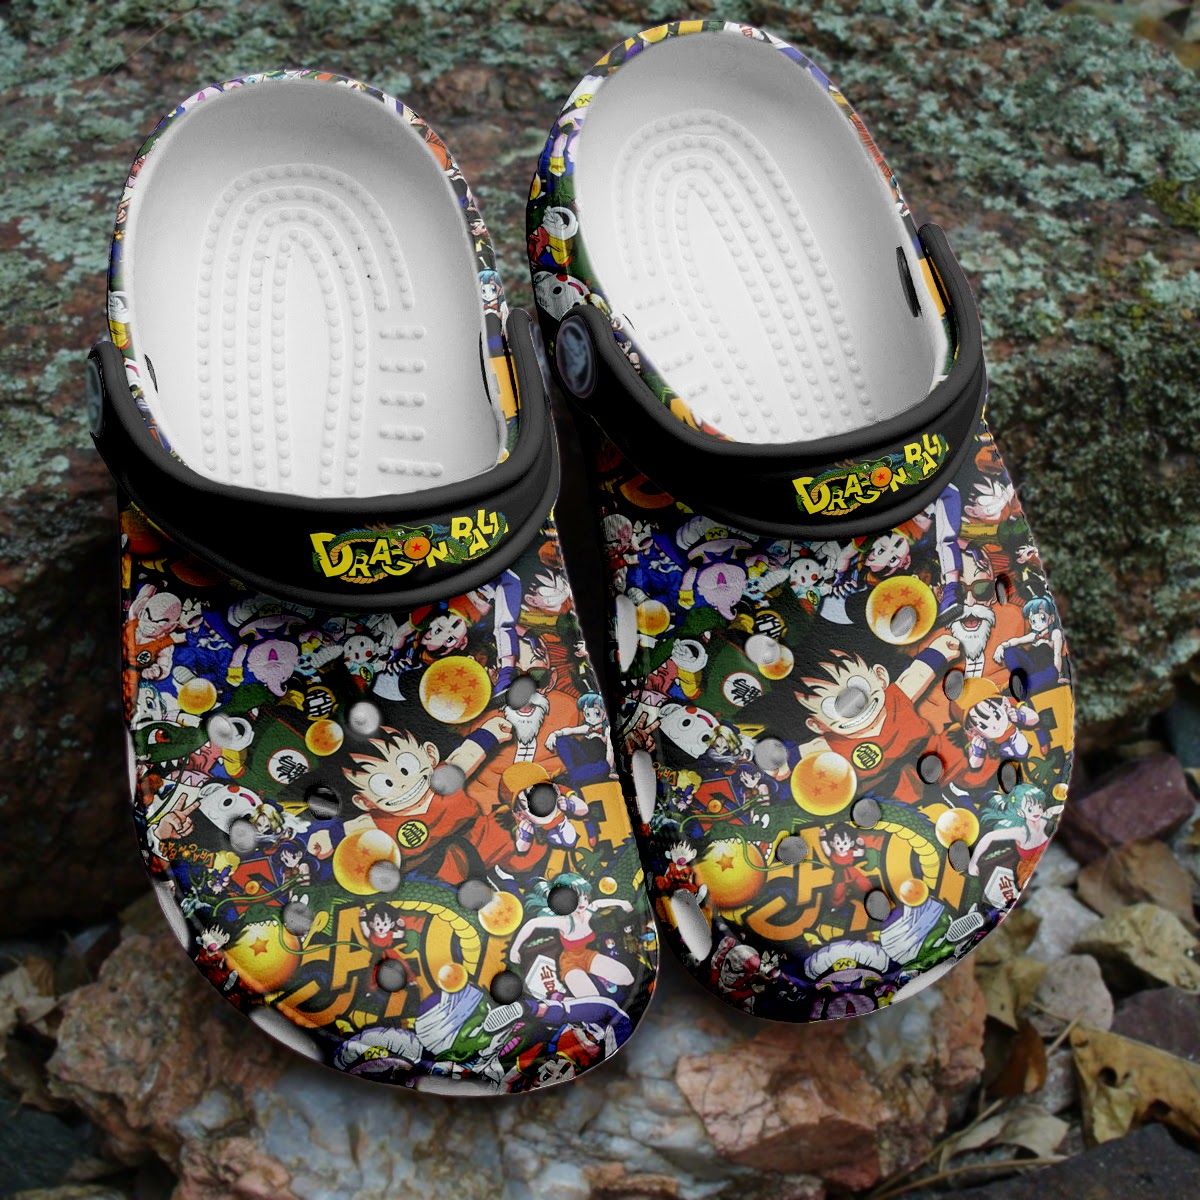 If you'd like to purchase a pair of Crocband Clogs, be sure to check out the official website. 171